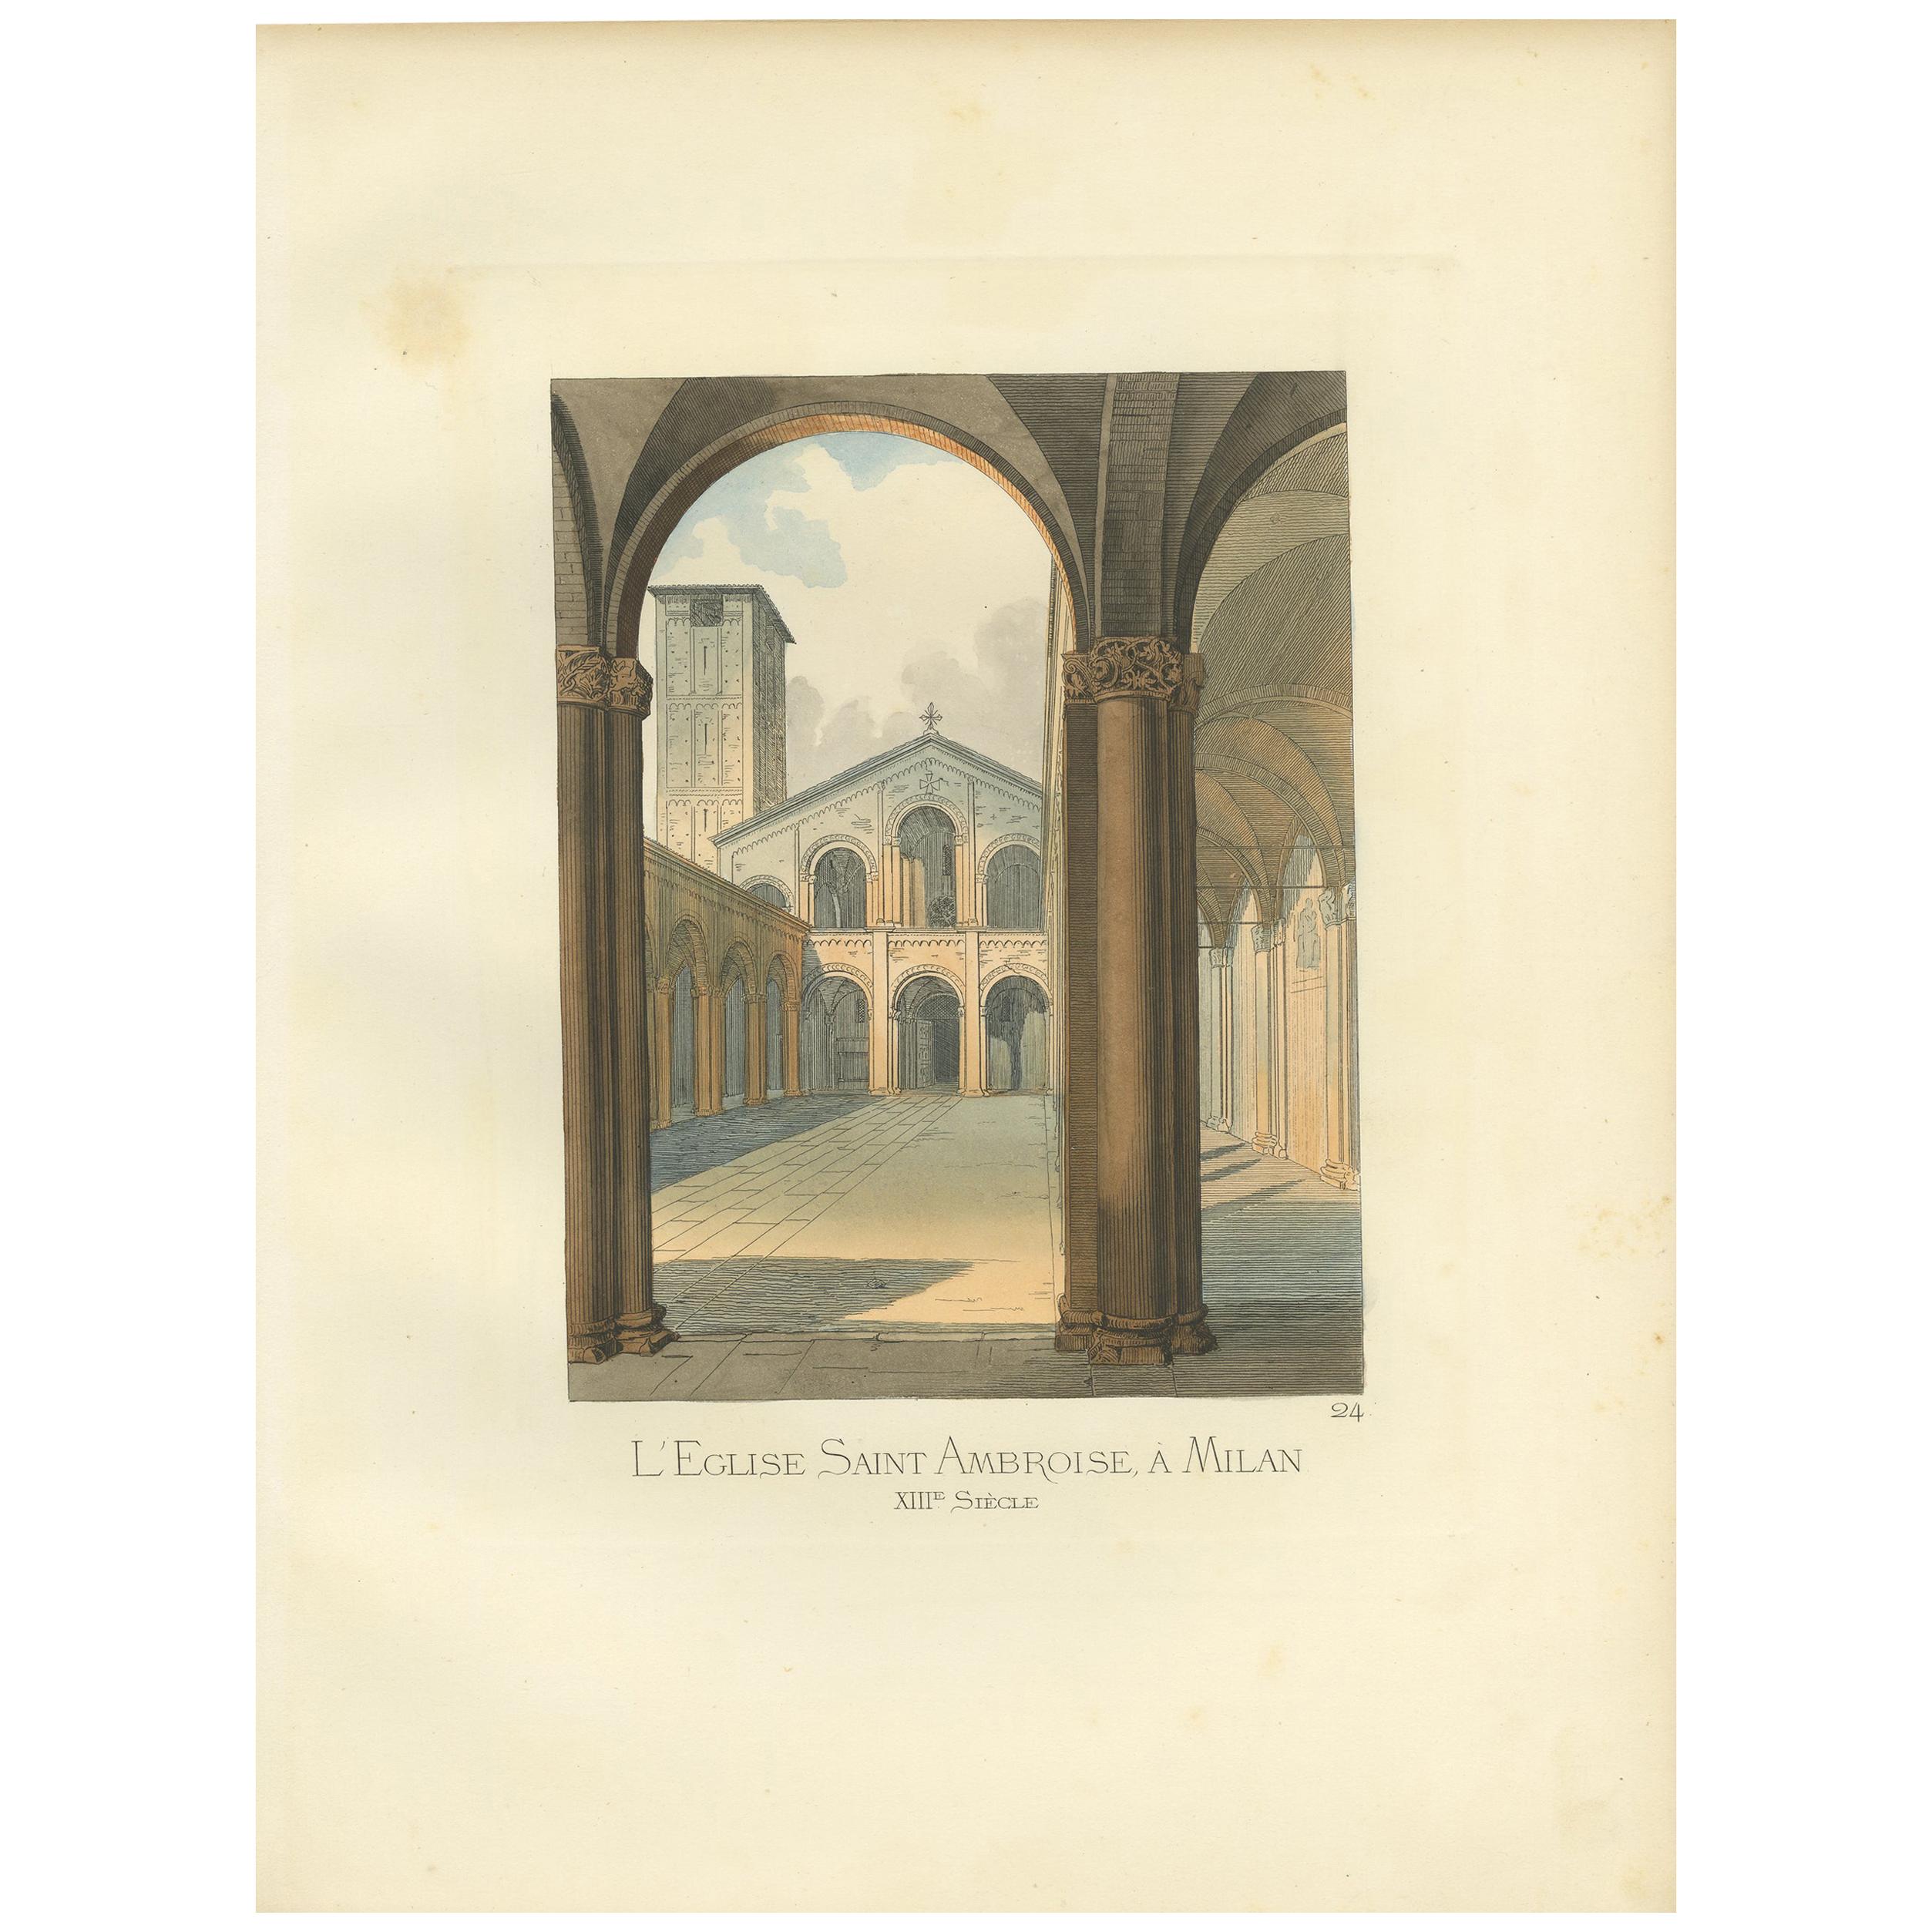 Antique Print of the St. Ambrose Church in Milan by Bonnard, 1860